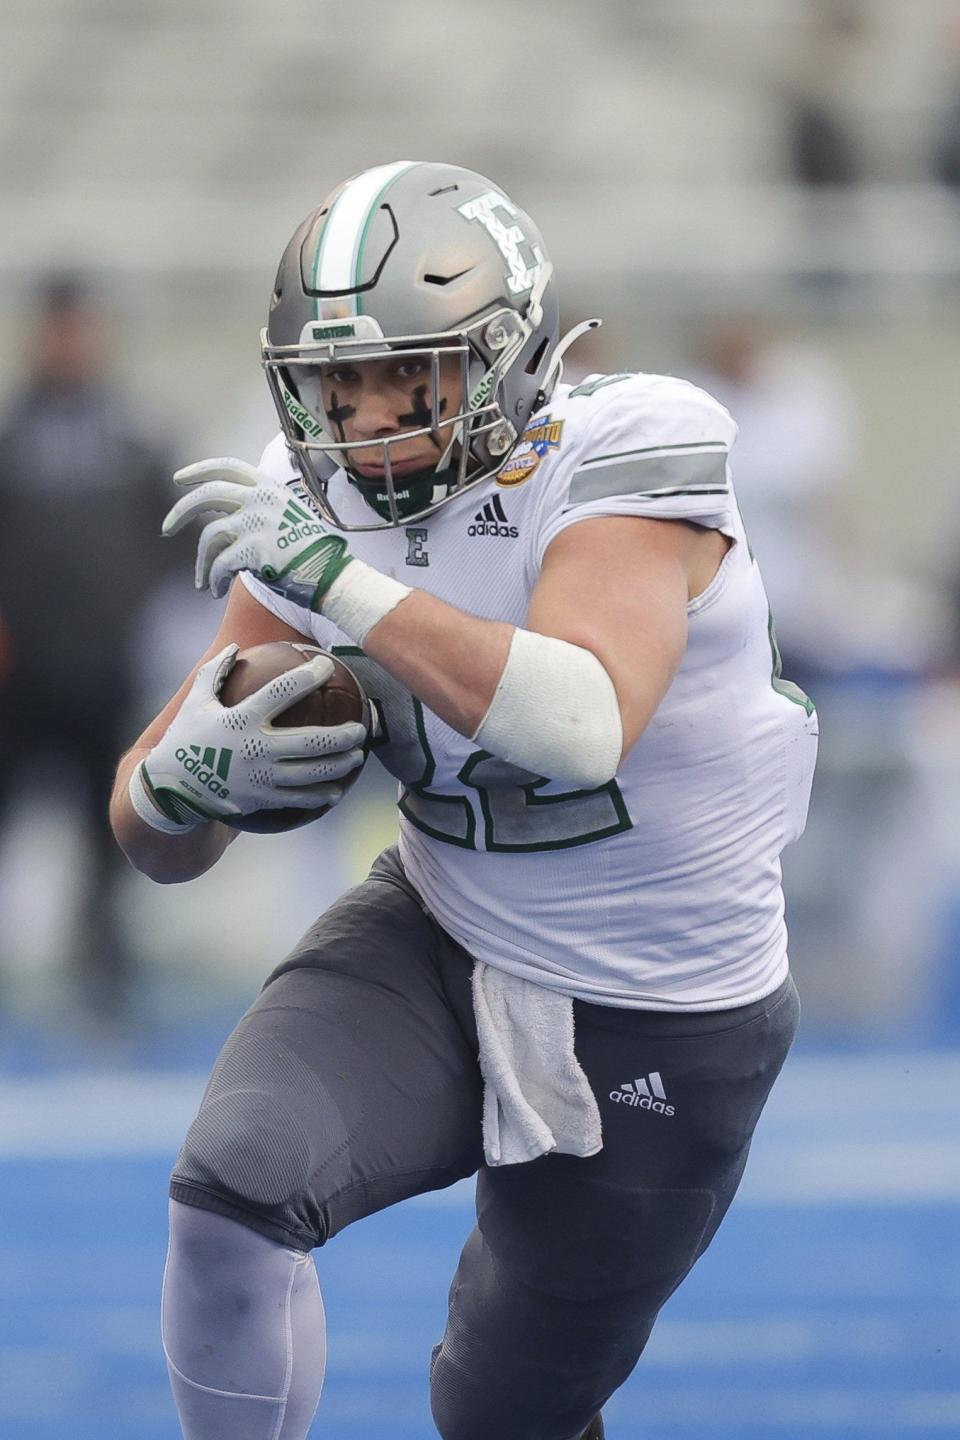 Eastern Michigan running back Samson Evans (22) runs with the ball against San Jose State in the first half of the Idaho Potato Bowl NCAA college football game, Tuesday, Dec. 20, 2022, in Boise, Idaho.